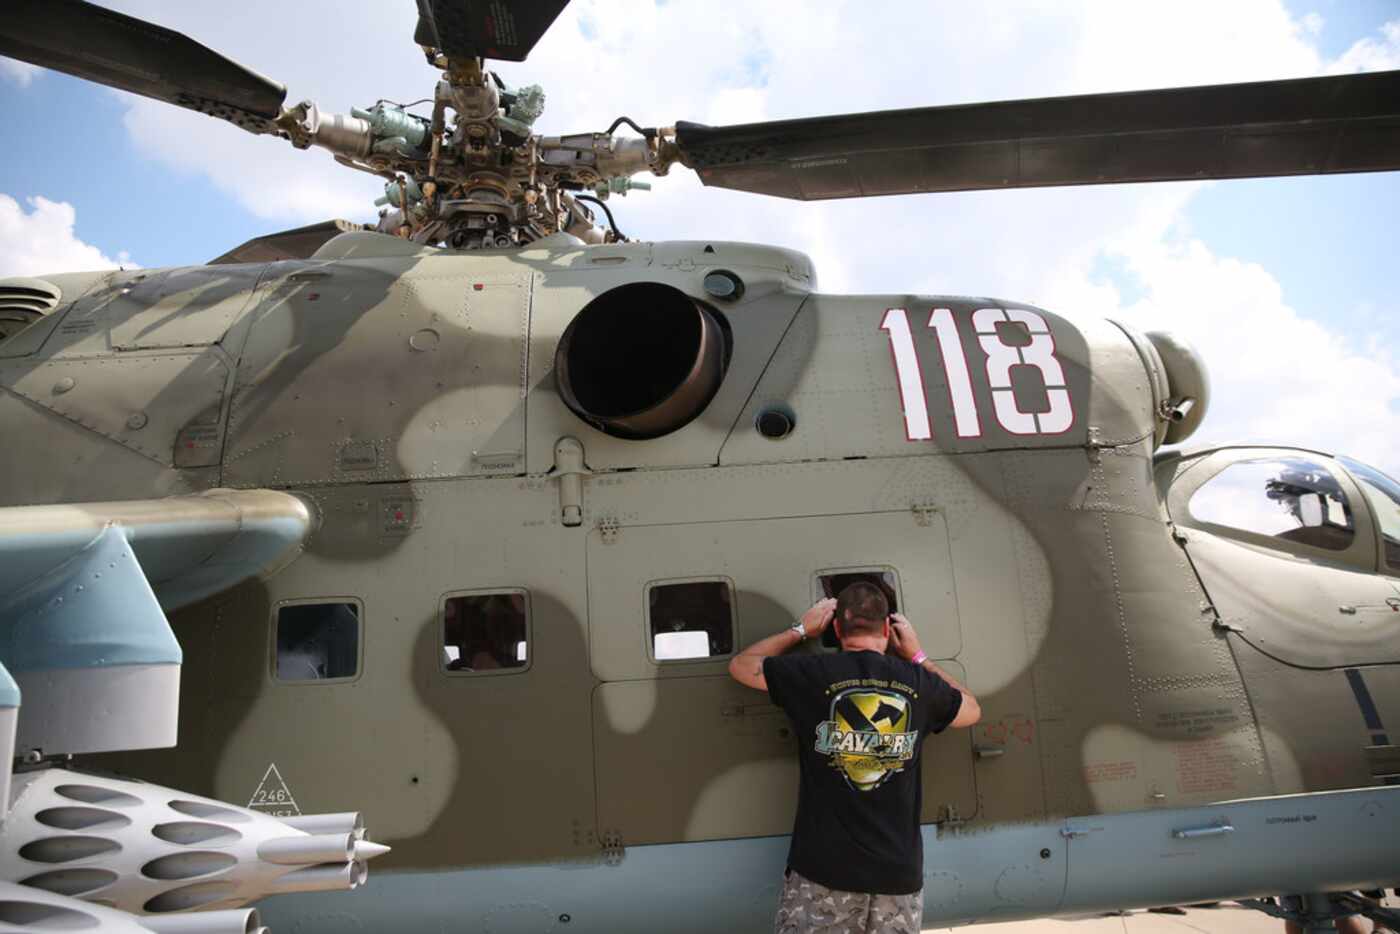 Andy Bass looks into a vintage Russian helicopter.